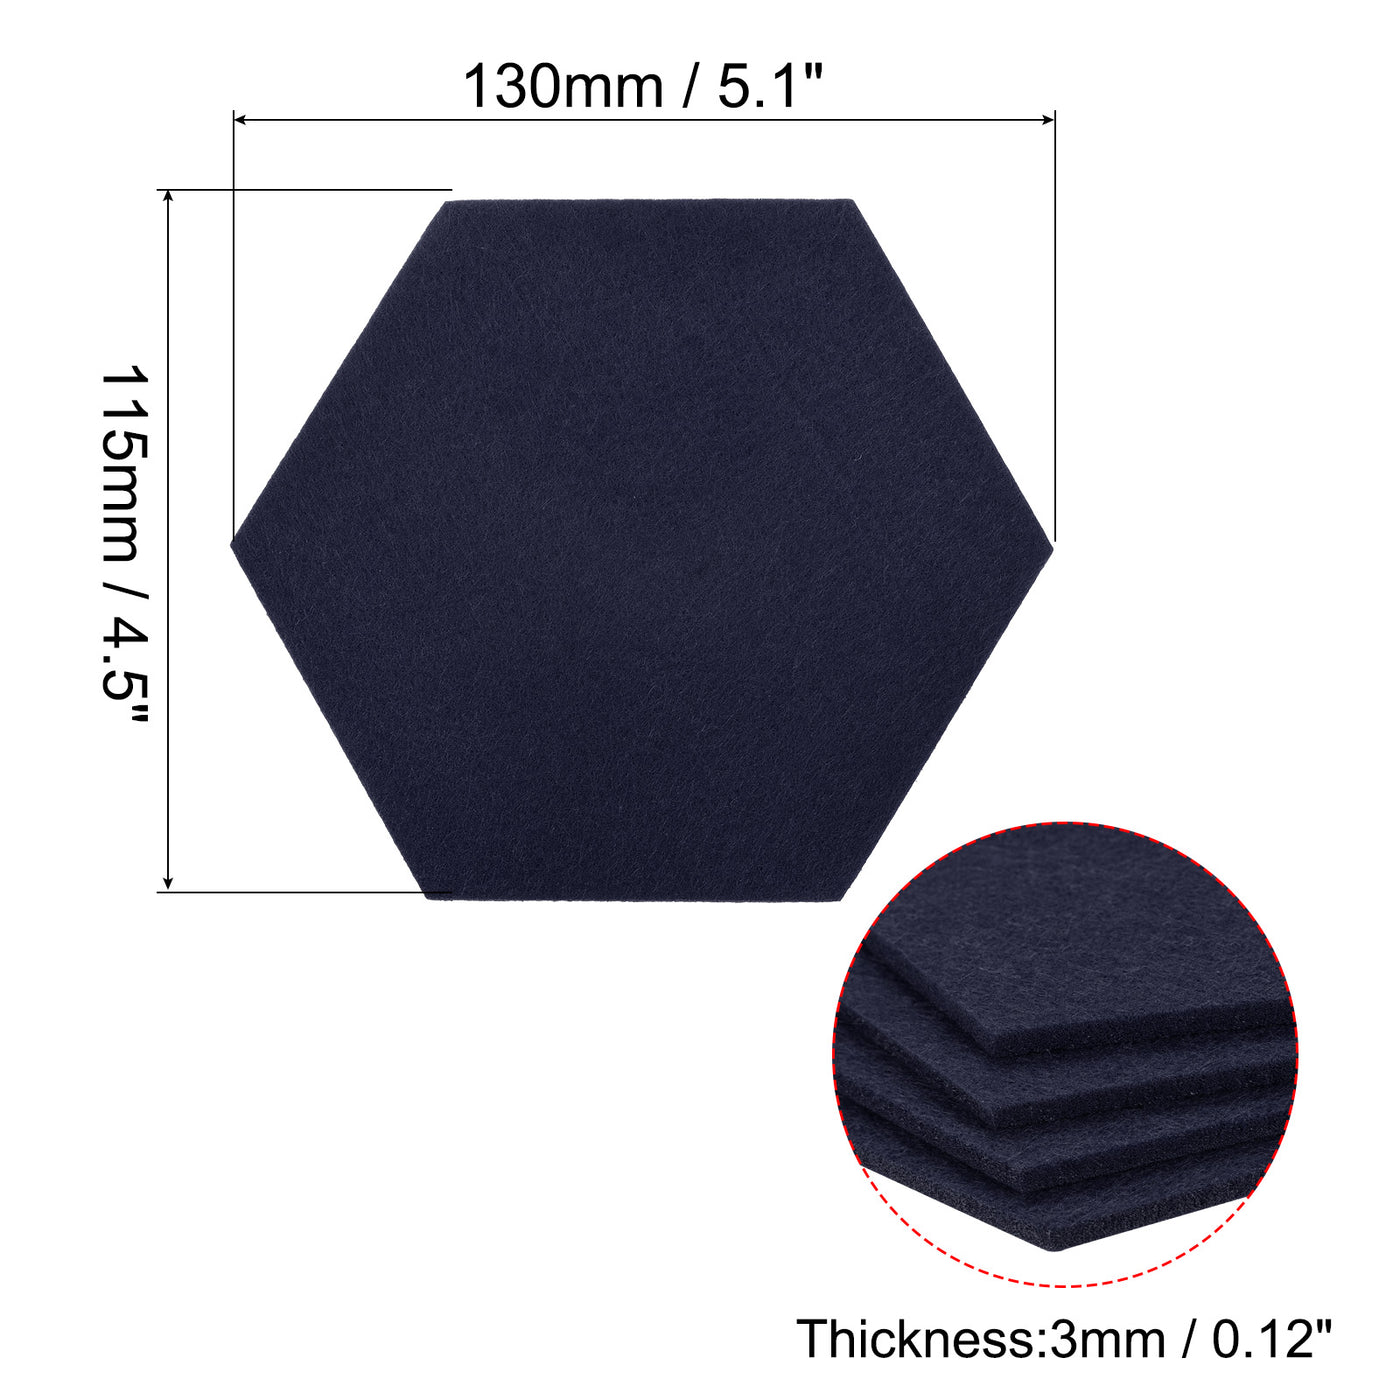 uxcell Uxcell Felt Coasters 4pcs Absorbent Pad Coaster for Drink Cup Pot Bowl Vase Dark Blue